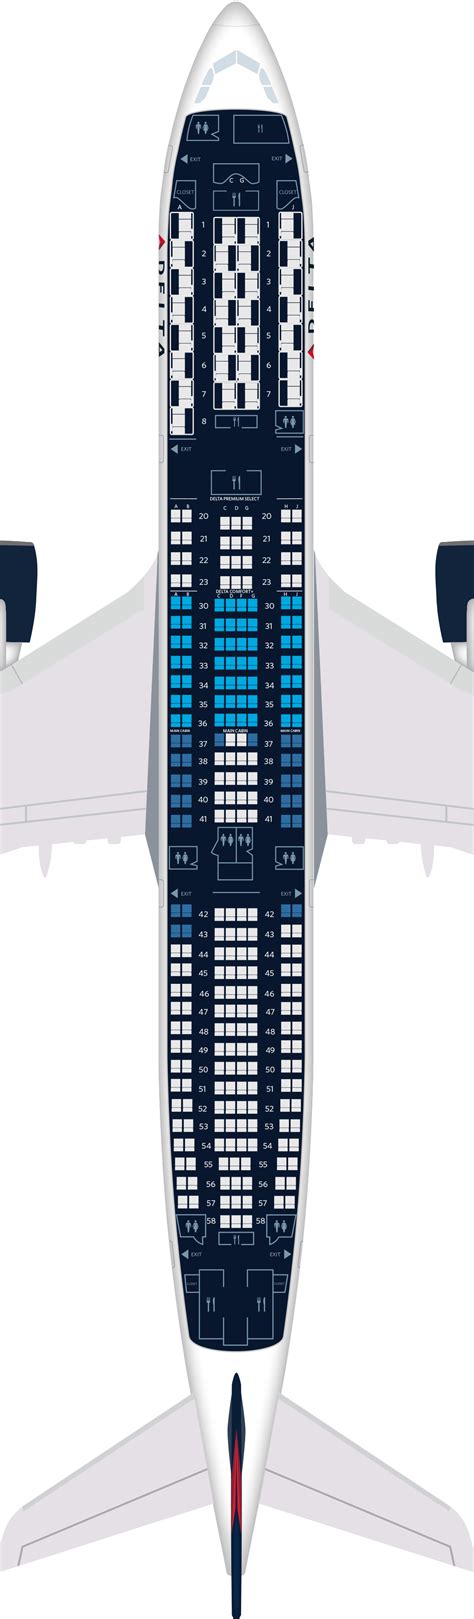 United Boeing 737 900 Seat Map